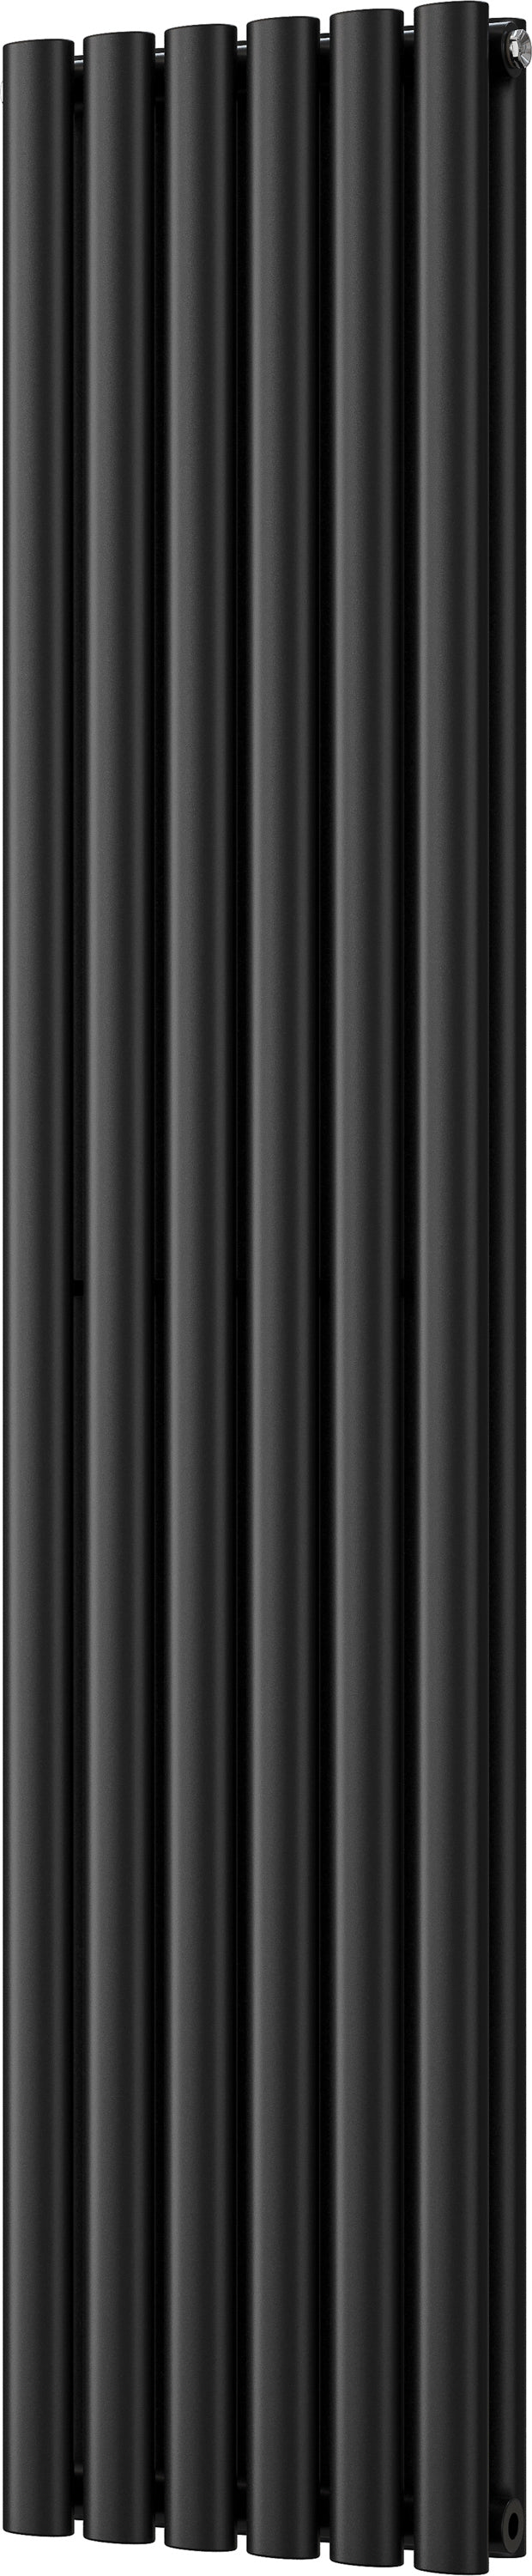 Omeara - Black Vertical Radiator H1600mm x W348mm Double Panel